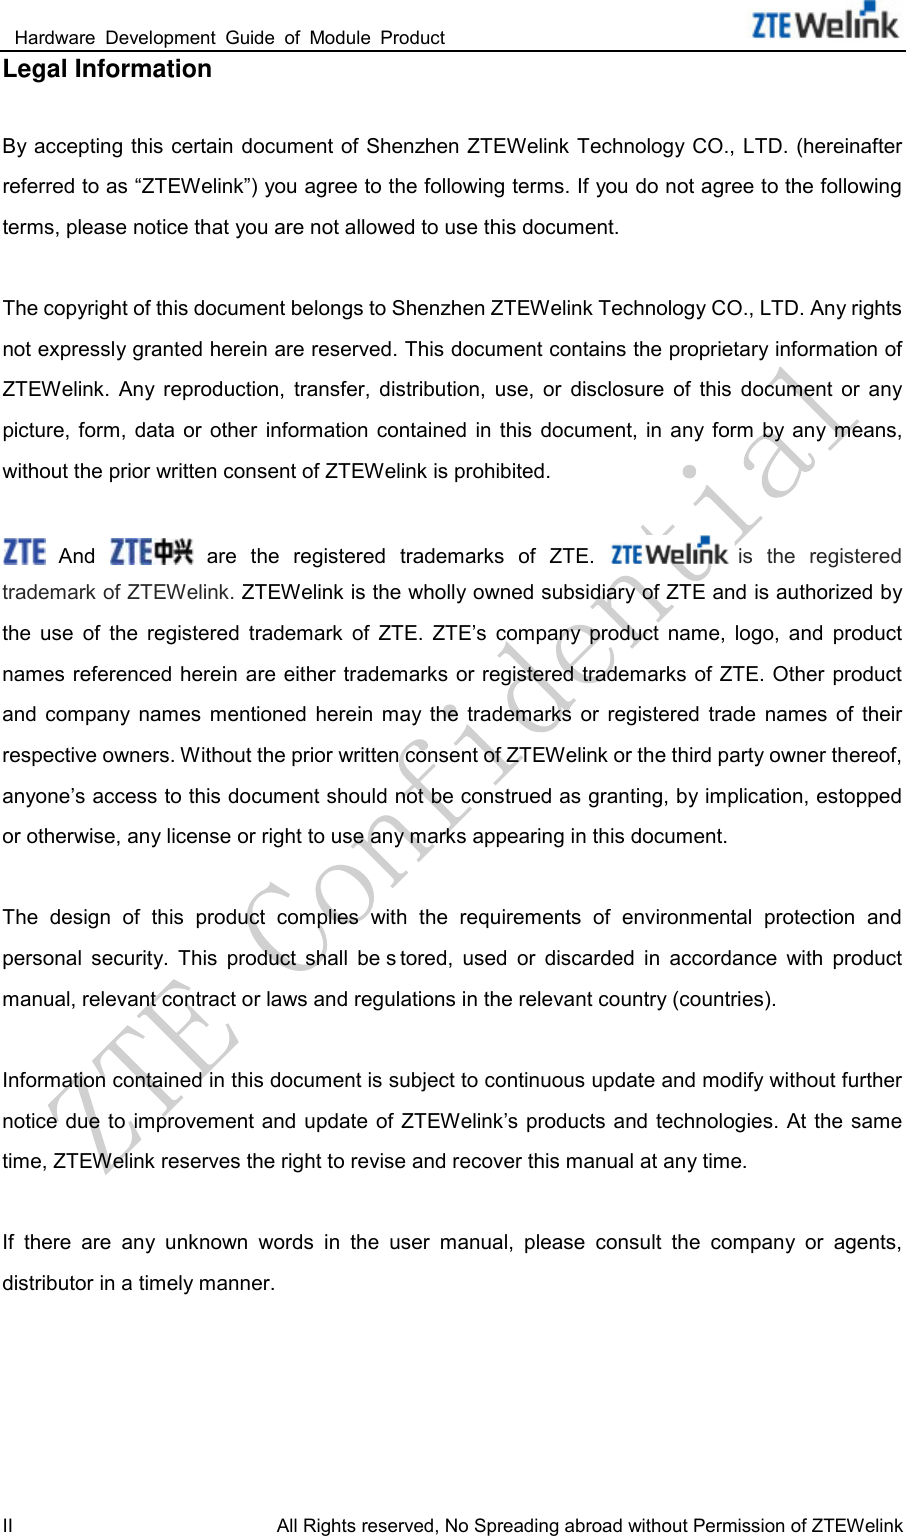  Hardware  Development  Guide  of  Module  Product                                                               II All Rights reserved, No Spreading abroad without Permission of ZTEWelink Legal Information  By accepting this certain  document of Shenzhen ZTEWelink Technology CO., LTD. (hereinafter referred to as “ZTEWelink”) you agree to the following terms. If you do not agree to the following terms, please notice that you are not allowed to use this document.  The copyright of this document belongs to Shenzhen ZTEWelink Technology CO., LTD. Any rights not expressly granted herein are reserved. This document contains the proprietary information of ZTEWelink.  Any  reproduction,  transfer,  distribution,  use,  or  disclosure  of  this  document  or  any picture,  form,  data  or  other  information  contained  in  this  document,  in  any form  by any means, without the prior written consent of ZTEWelink is prohibited.   And   are  the  registered  trademarks  of  ZTE. is  the  registered trademark of ZTEWelink. ZTEWelink is the wholly owned subsidiary of ZTE and is authorized by the  use  of  the  registered  trademark  of  ZTE.  ZTE’s  company  product  name,  logo,  and  product names referenced herein are either trademarks or registered  trademarks of ZTE. Other product and  company  names  mentioned  herein  may  the  trademarks  or  registered  trade  names  of  their respective owners. Without the prior written consent of ZTEWelink or the third party owner thereof, anyone’s access to this document should not be construed as granting, by implication, estopped or otherwise, any license or right to use any marks appearing in this document.    The  design  of  this  product  complies  with  the  requirements  of  environmental  protection  and personal  security.  This  product  shall  be s tored,  used  or  discarded  in  accordance  with  product manual, relevant contract or laws and regulations in the relevant country (countries).  Information contained in this document is subject to continuous update and modify without further notice due to  improvement  and update of ZTEWelink’s products and technologies. At the same time, ZTEWelink reserves the right to revise and recover this manual at any time.  If  there  are  any  unknown  words  in  the  user  manual,  please  consult  the  company  or  agents, distributor in a timely manner. 